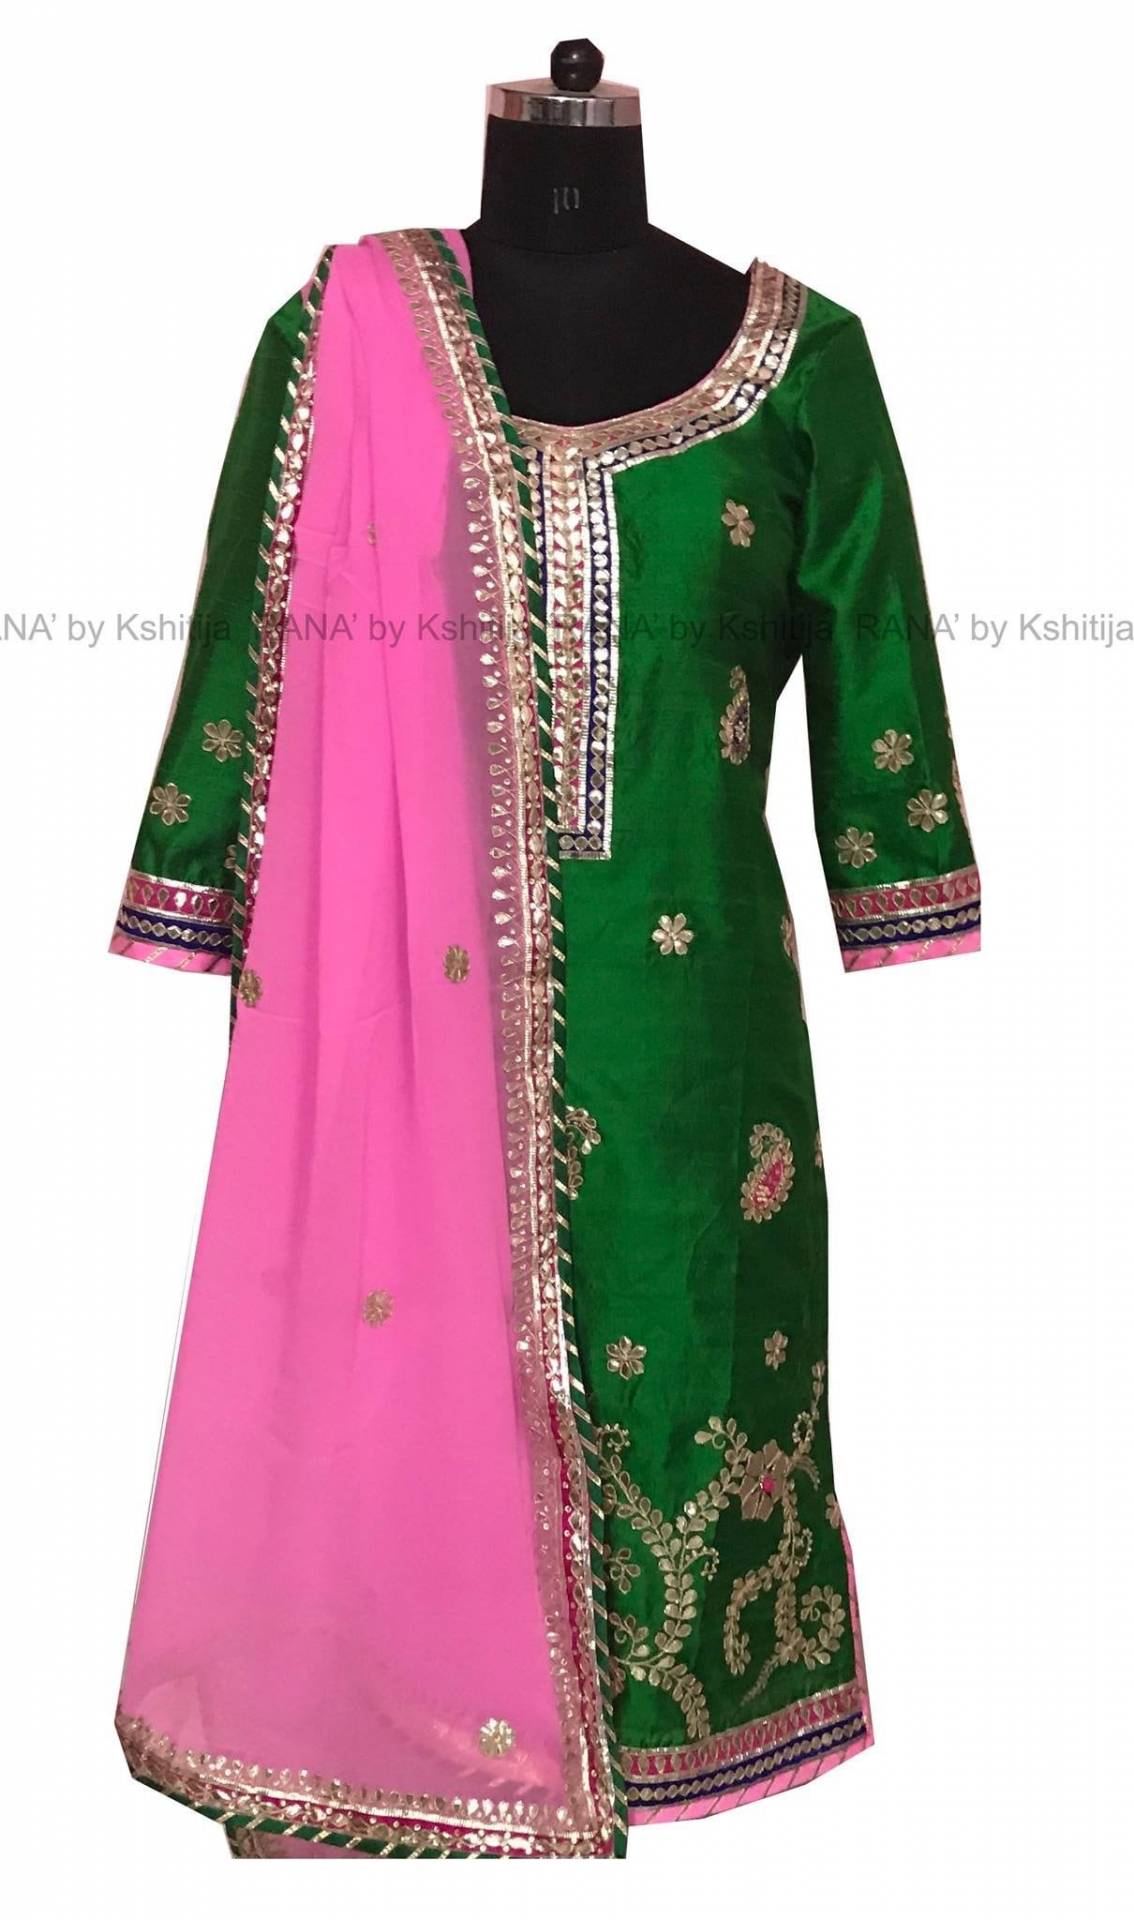 Pretty pink and green salwar suit